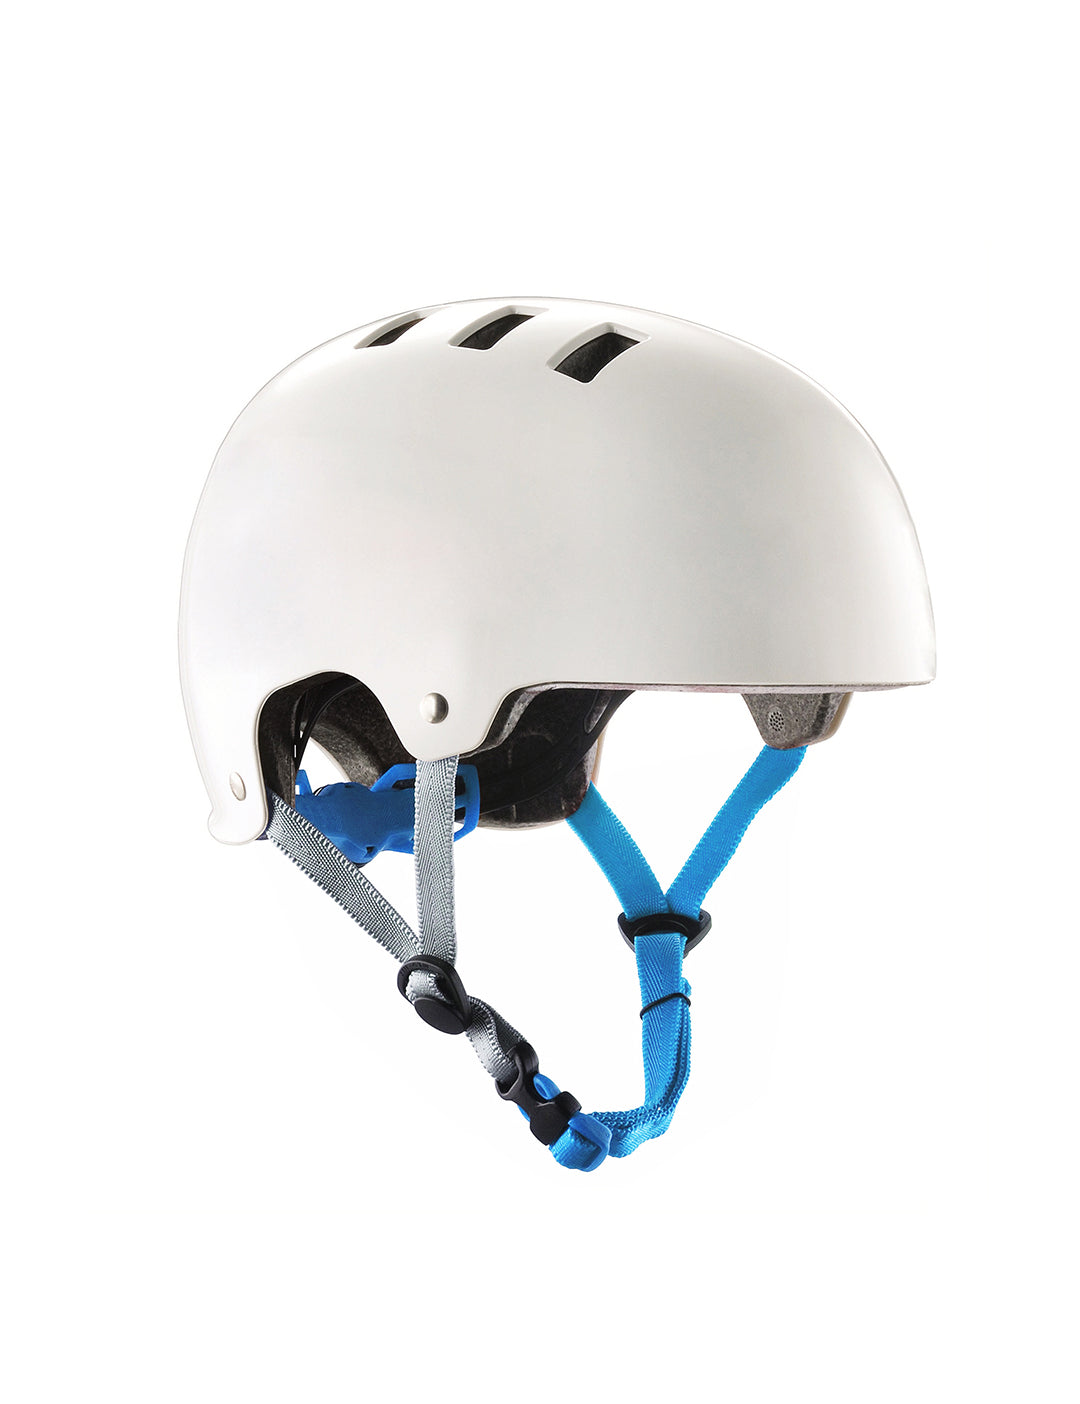 Helmets Adjustable for Kids Youth Adults